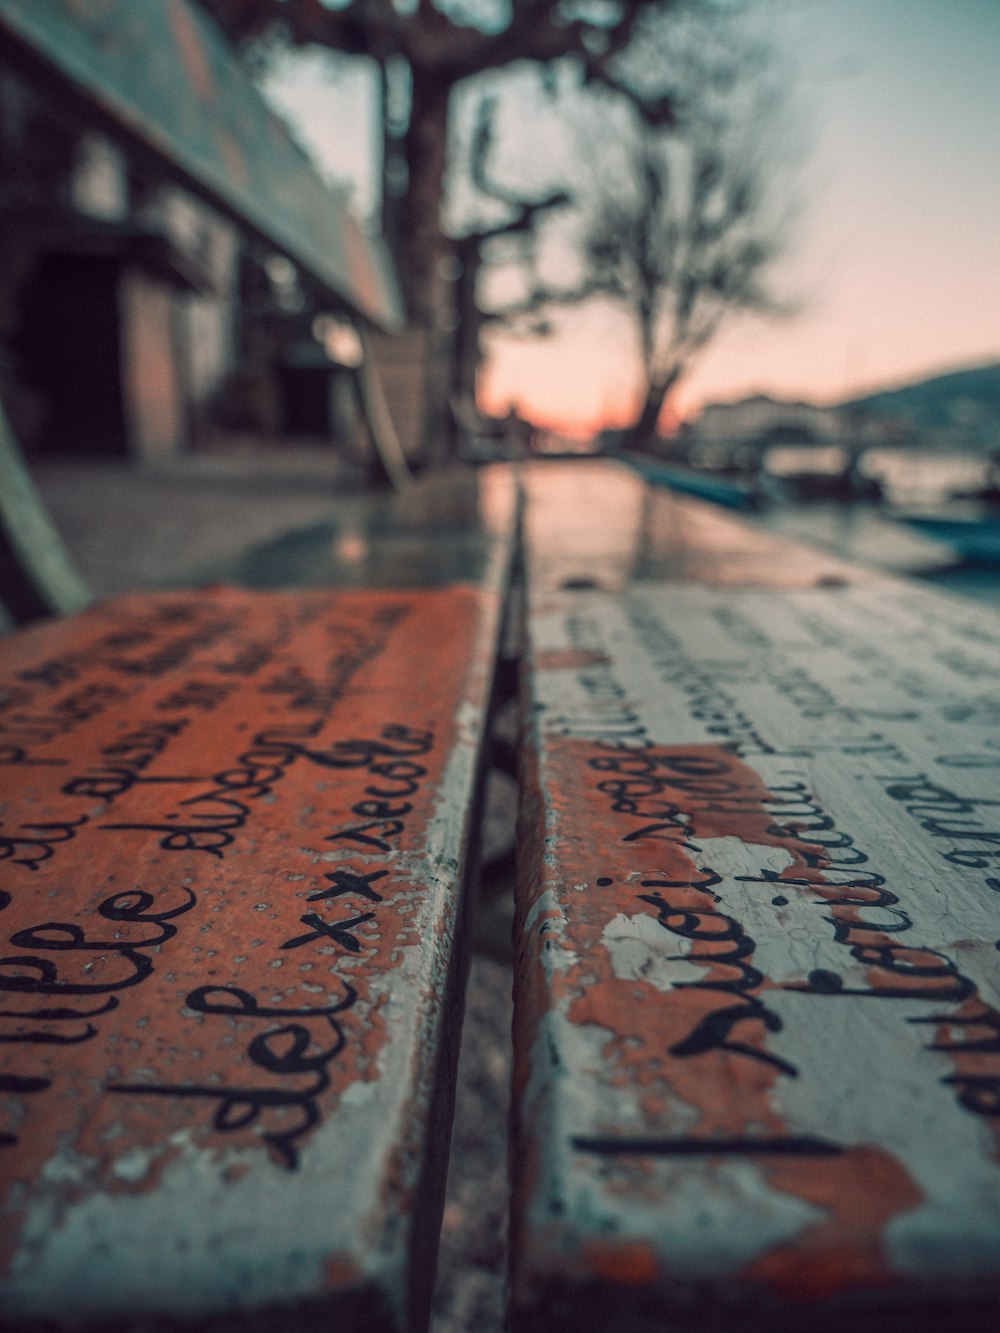 a close up of a wooden bench with writing on it